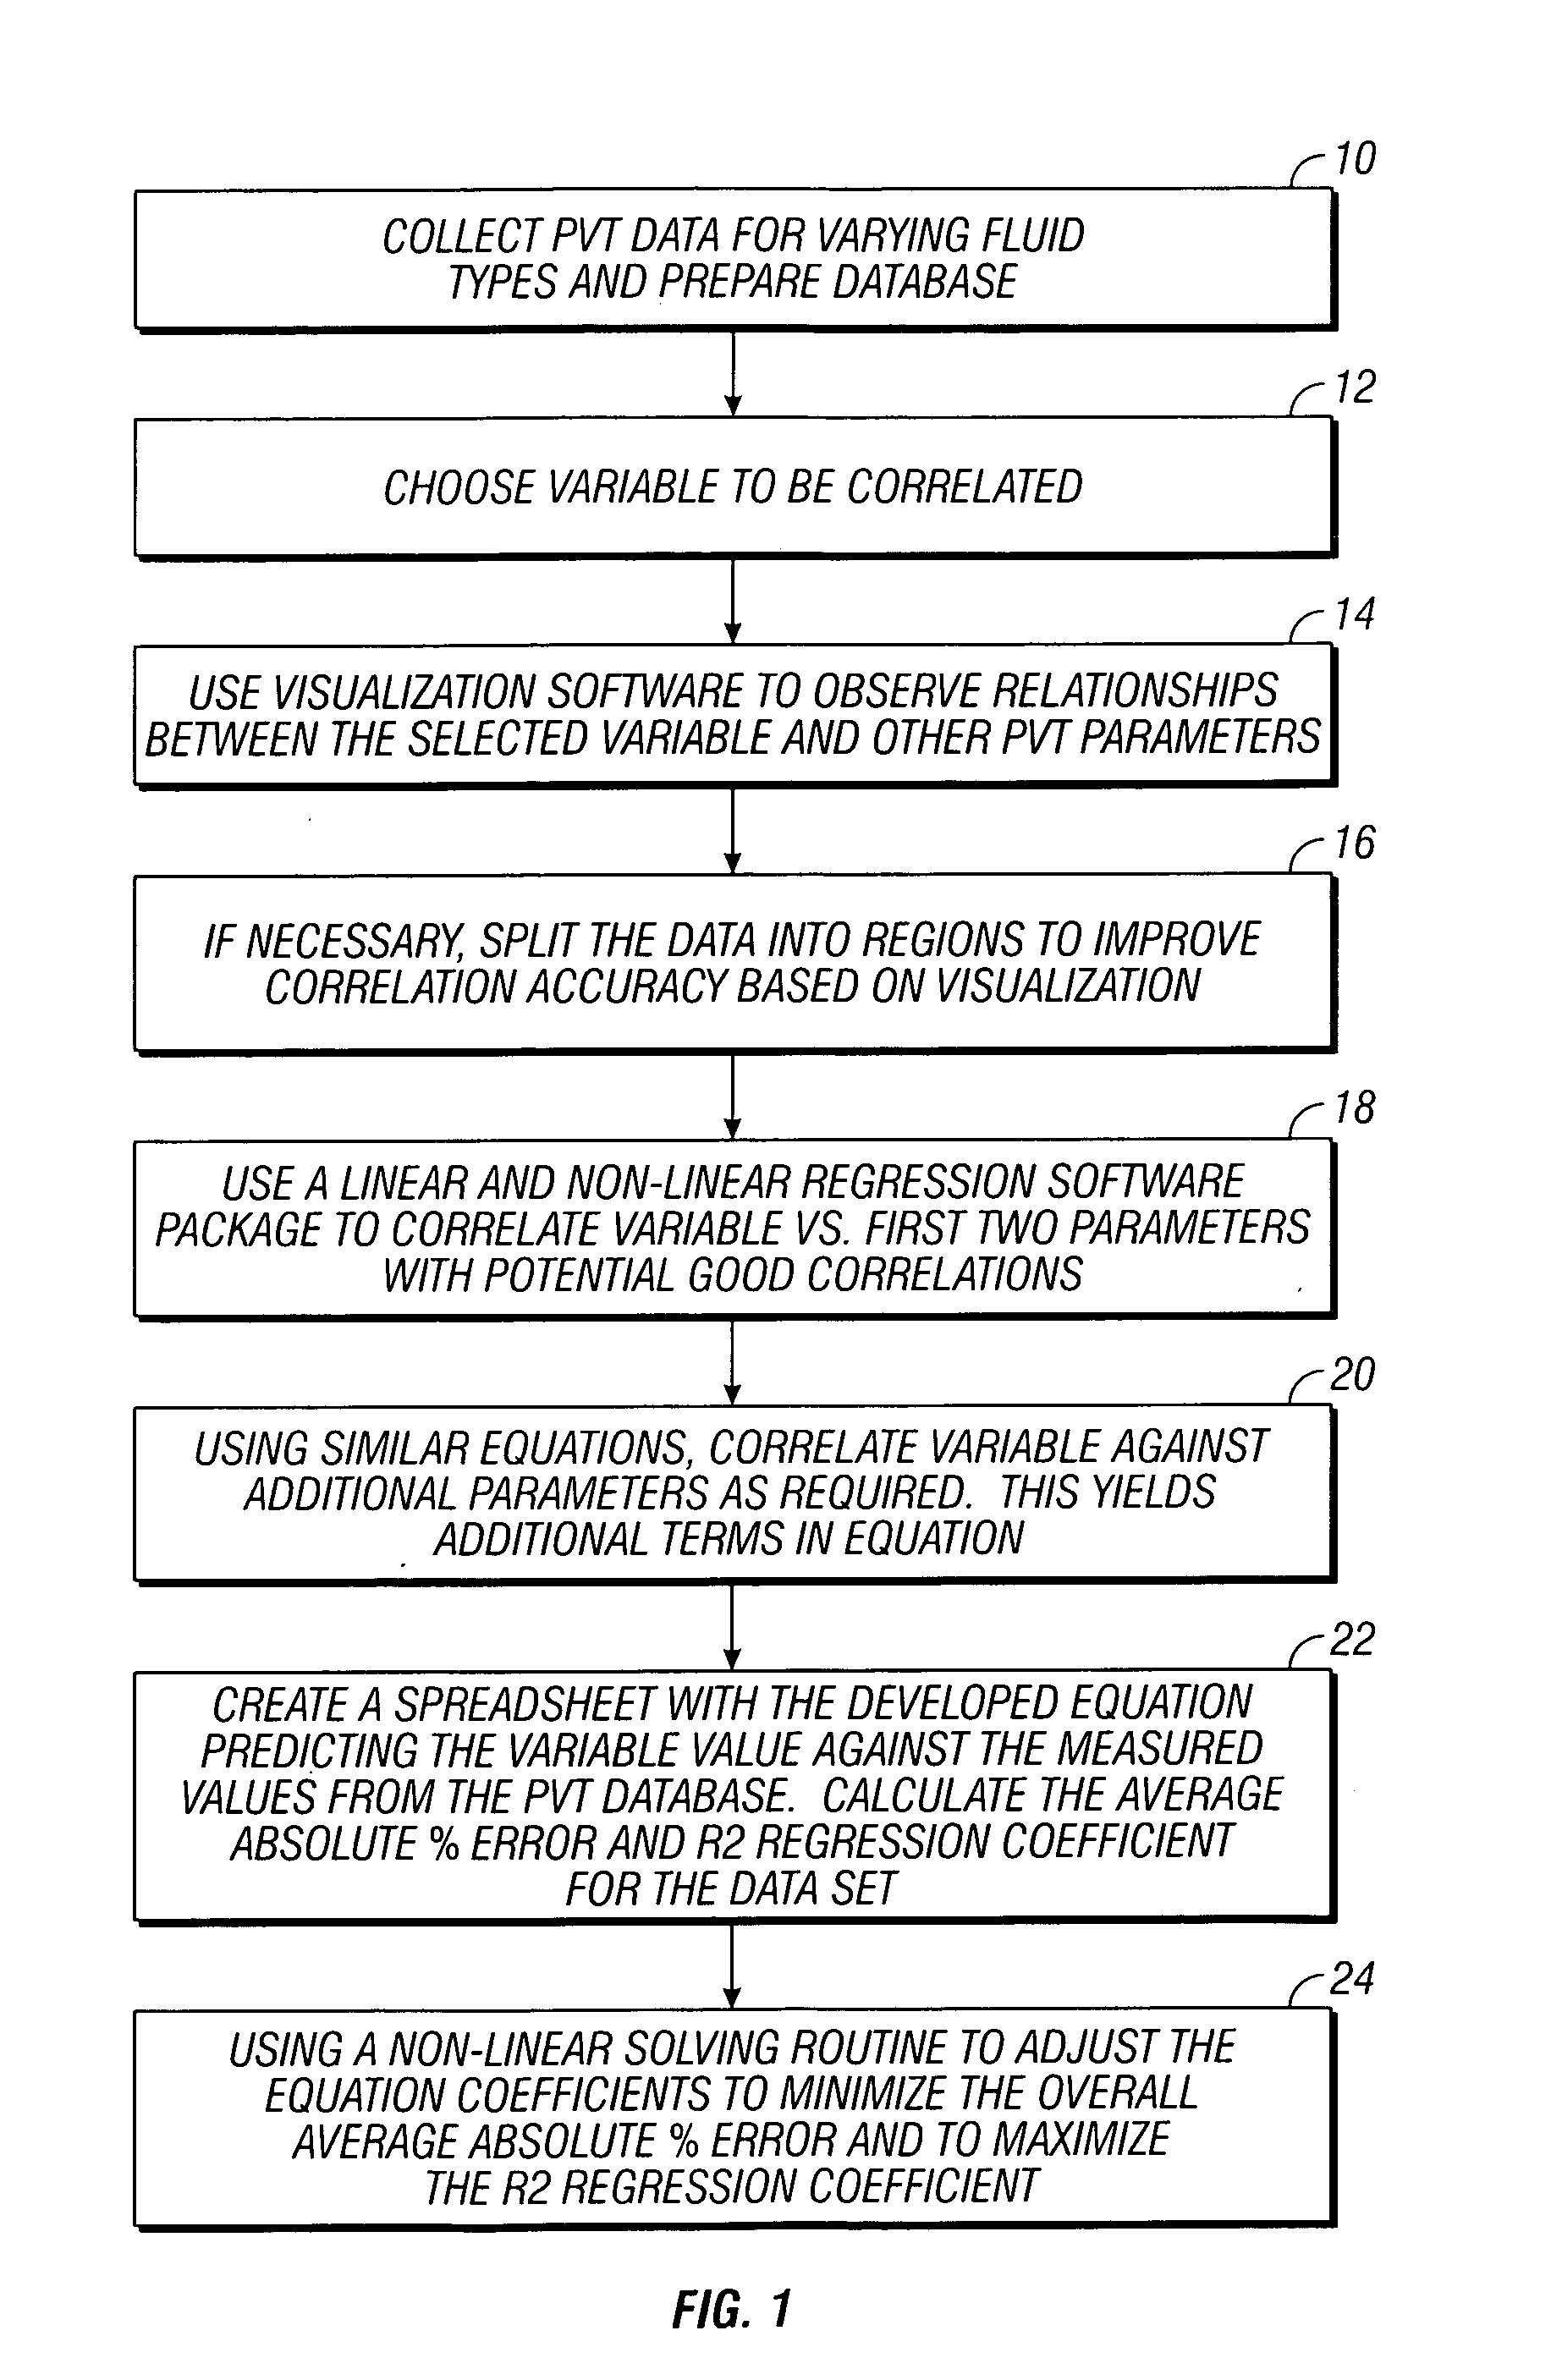 Method and apparatus for simulating PVT parameters